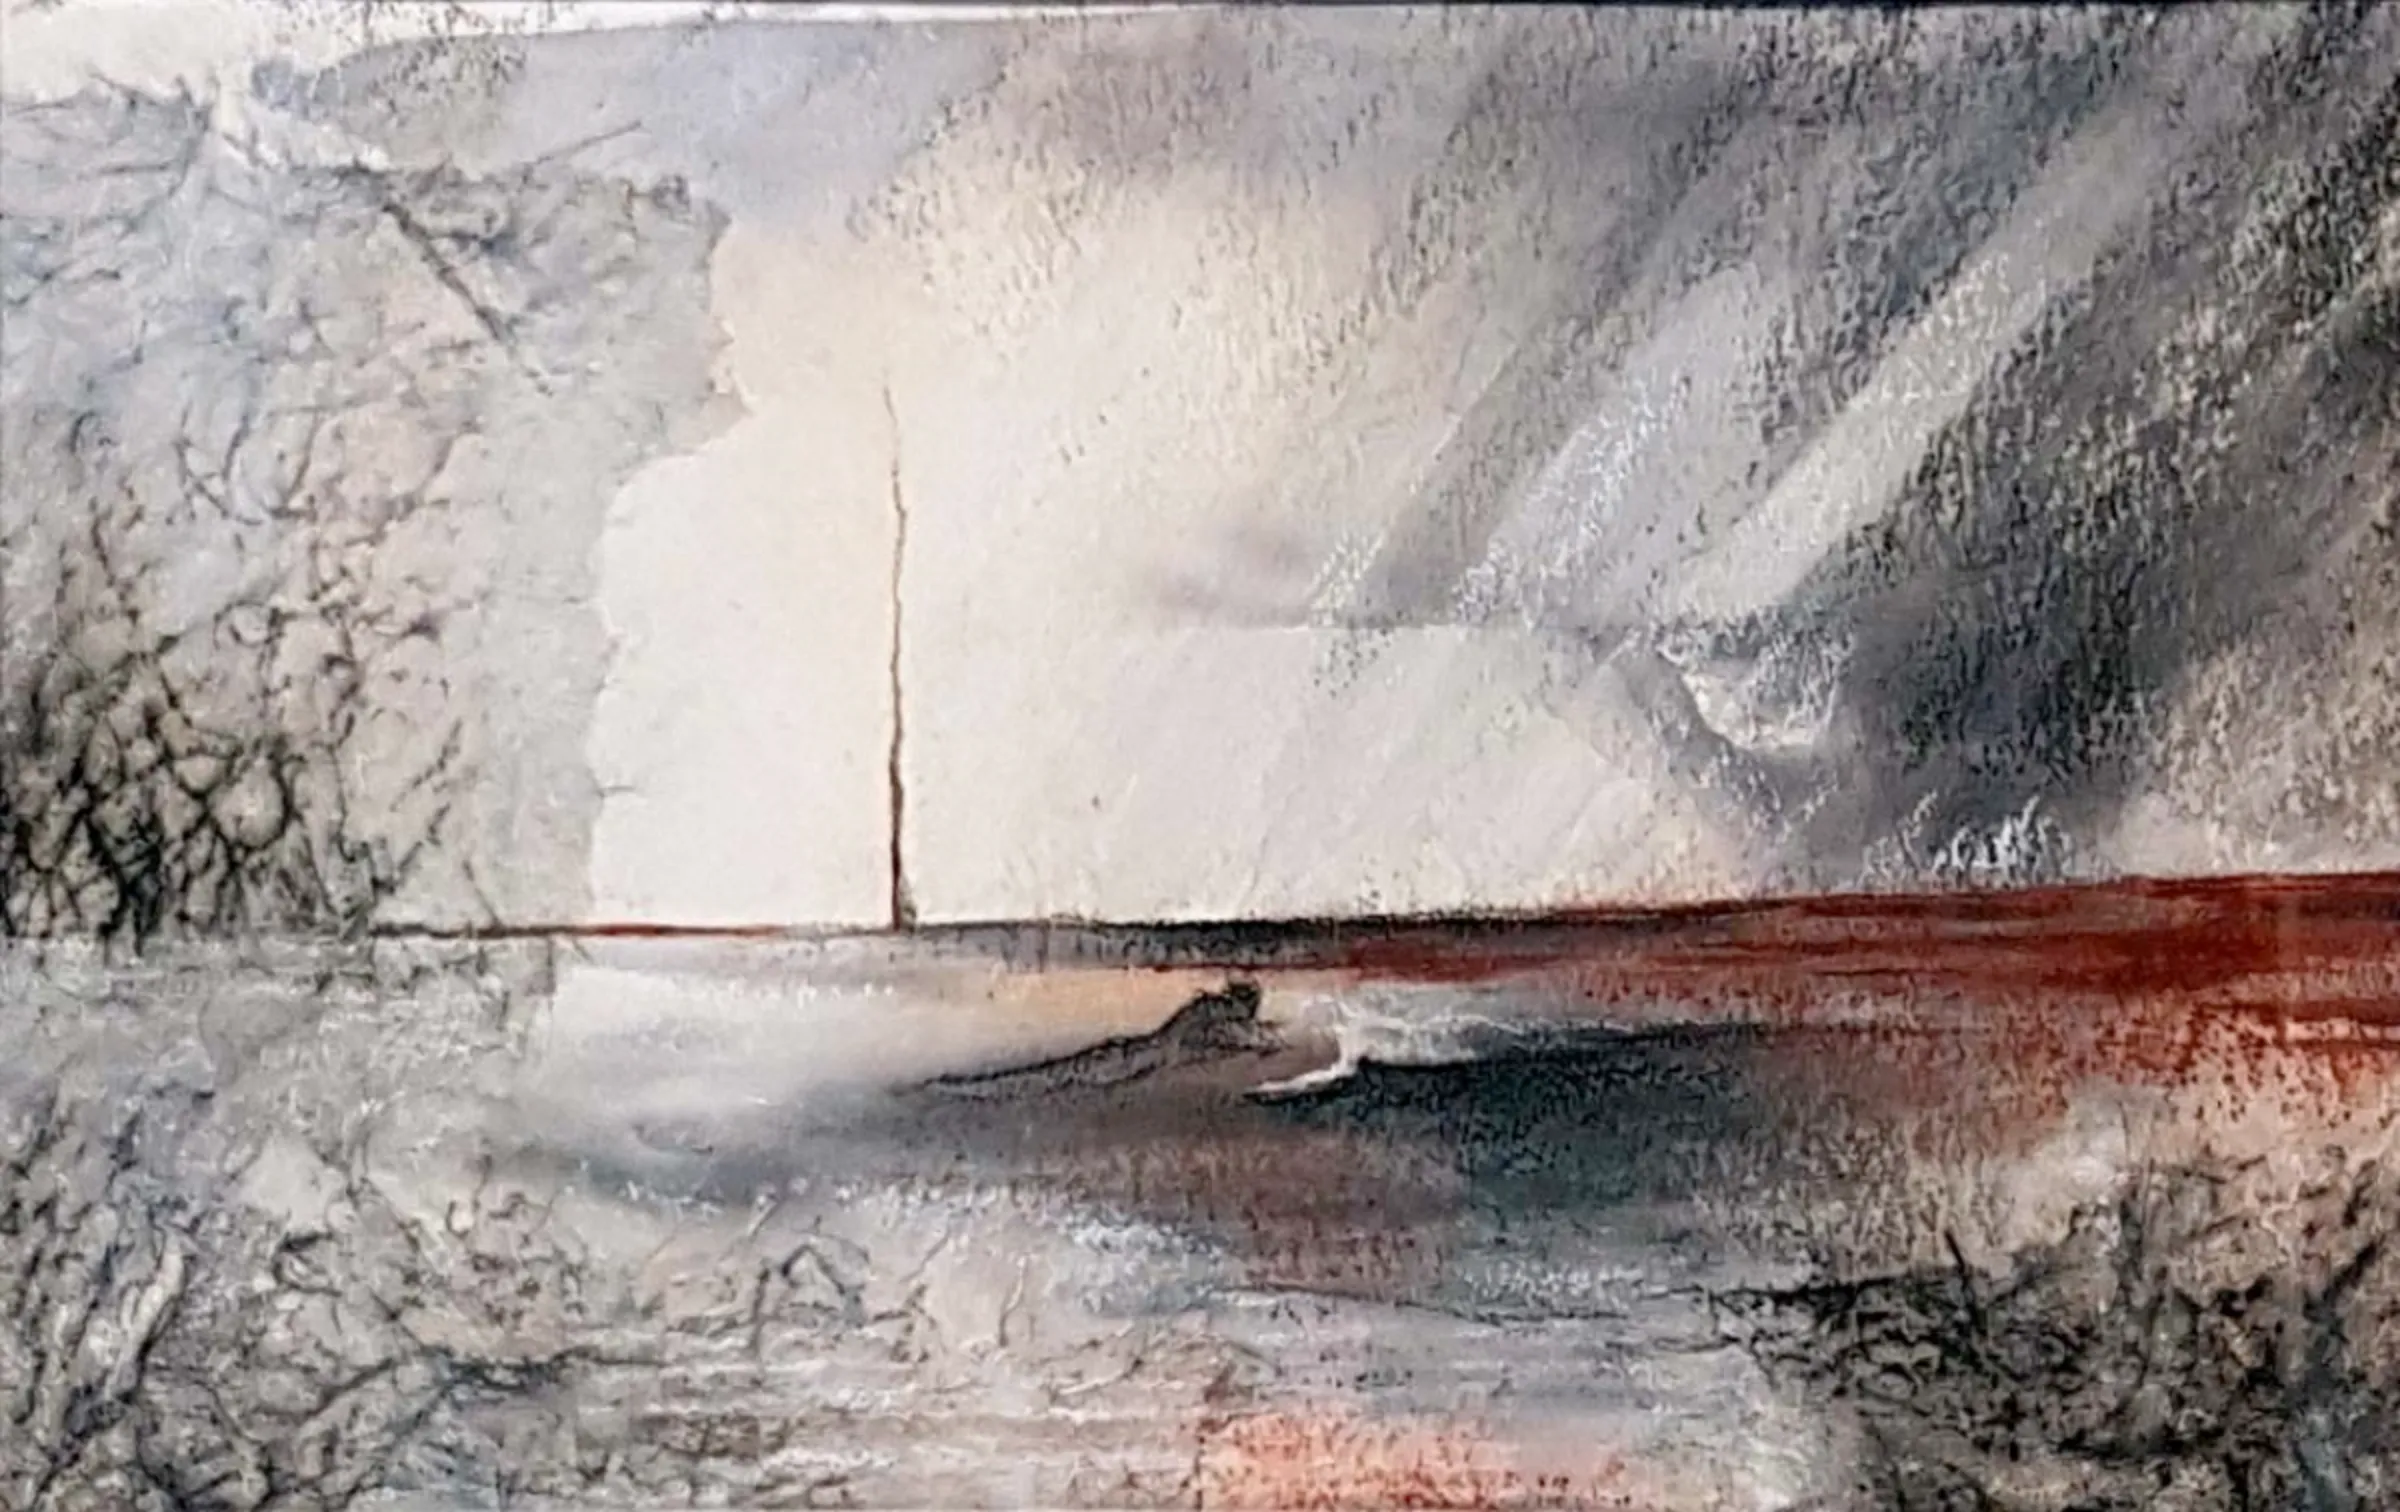 Anoma Wijewardene's painting 'Meeting across Distance of Sand and Sea', shown in the exhibition 'Recounting Histories' (2022). Anoma Wijewardene/Handout via Thomson Reuters Foundation